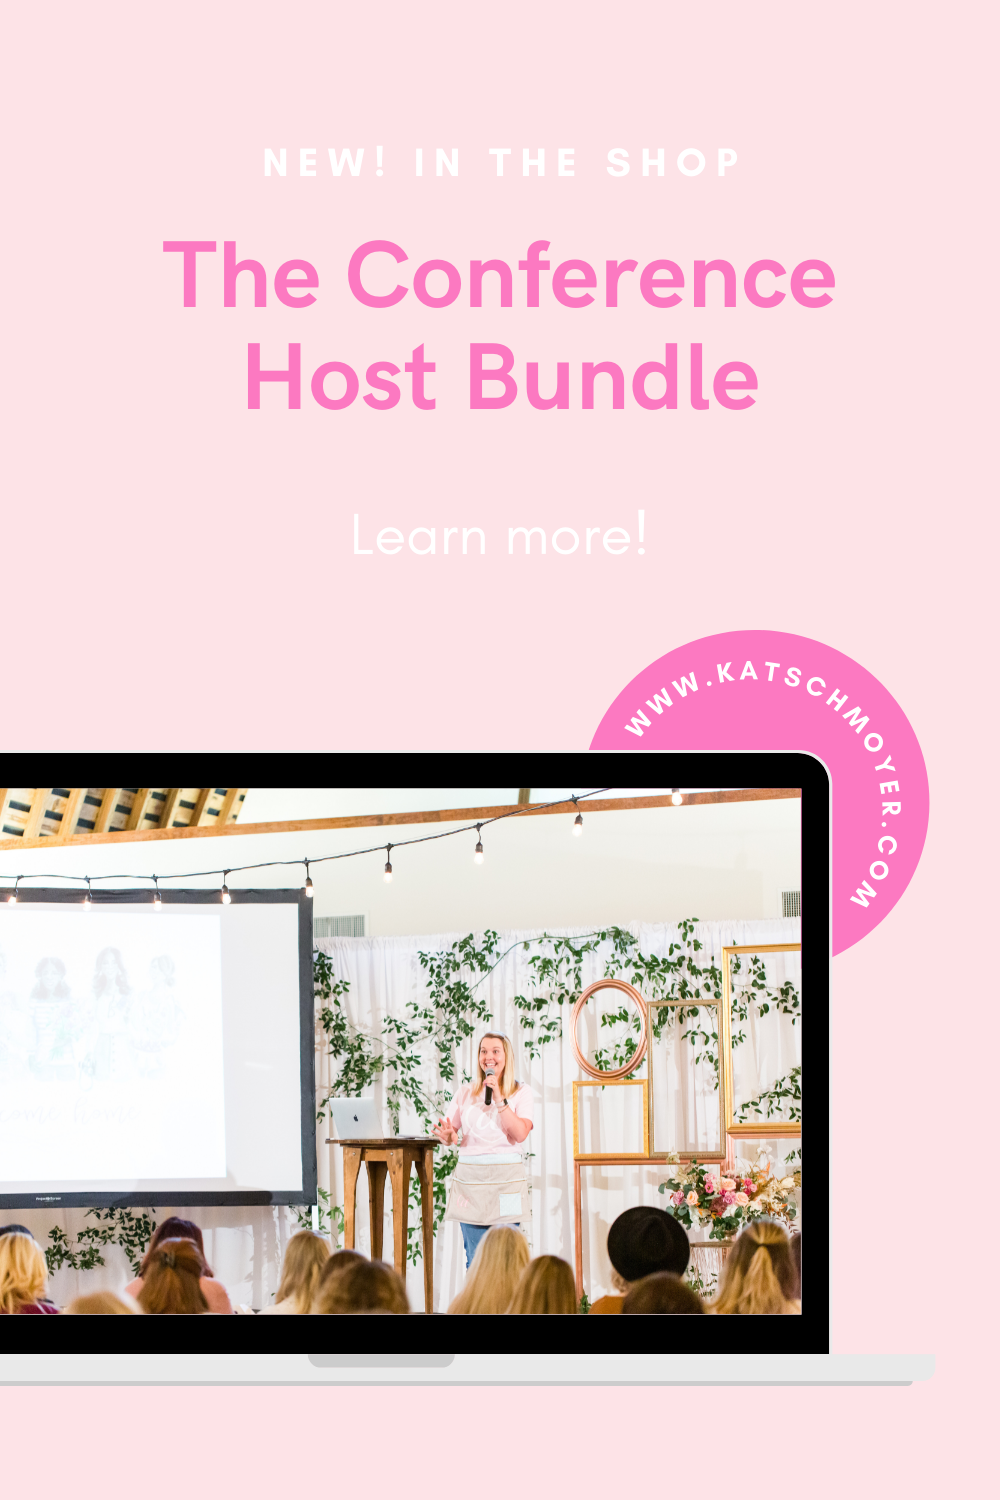 Conference Host Bundle: new product in the Kat Schmoyer shop with 10+ templates, checklists, and everything else you need to host your first conference with less stress! Learn more about this new product here